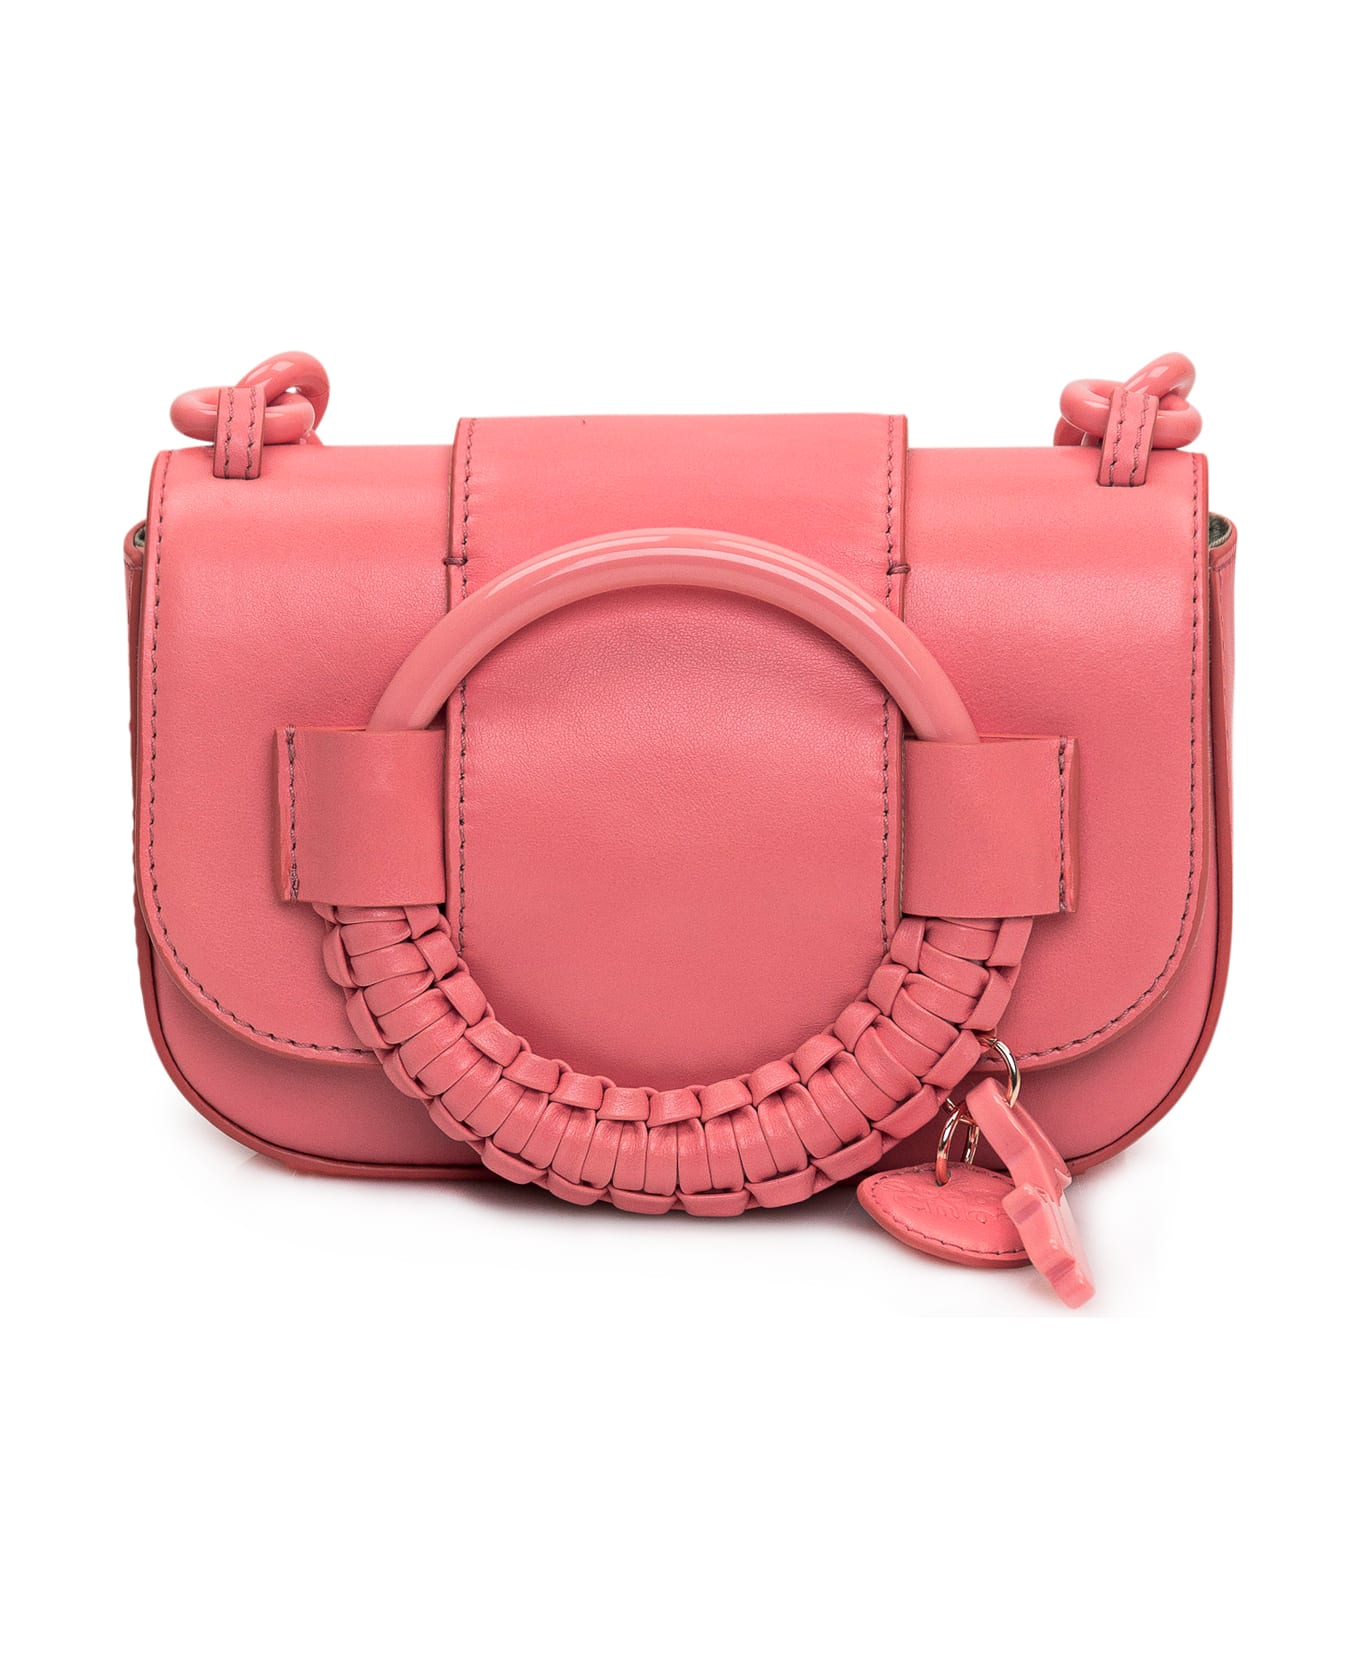 See by Chloé Hana Bag - SUNSET PINK トートバッグ